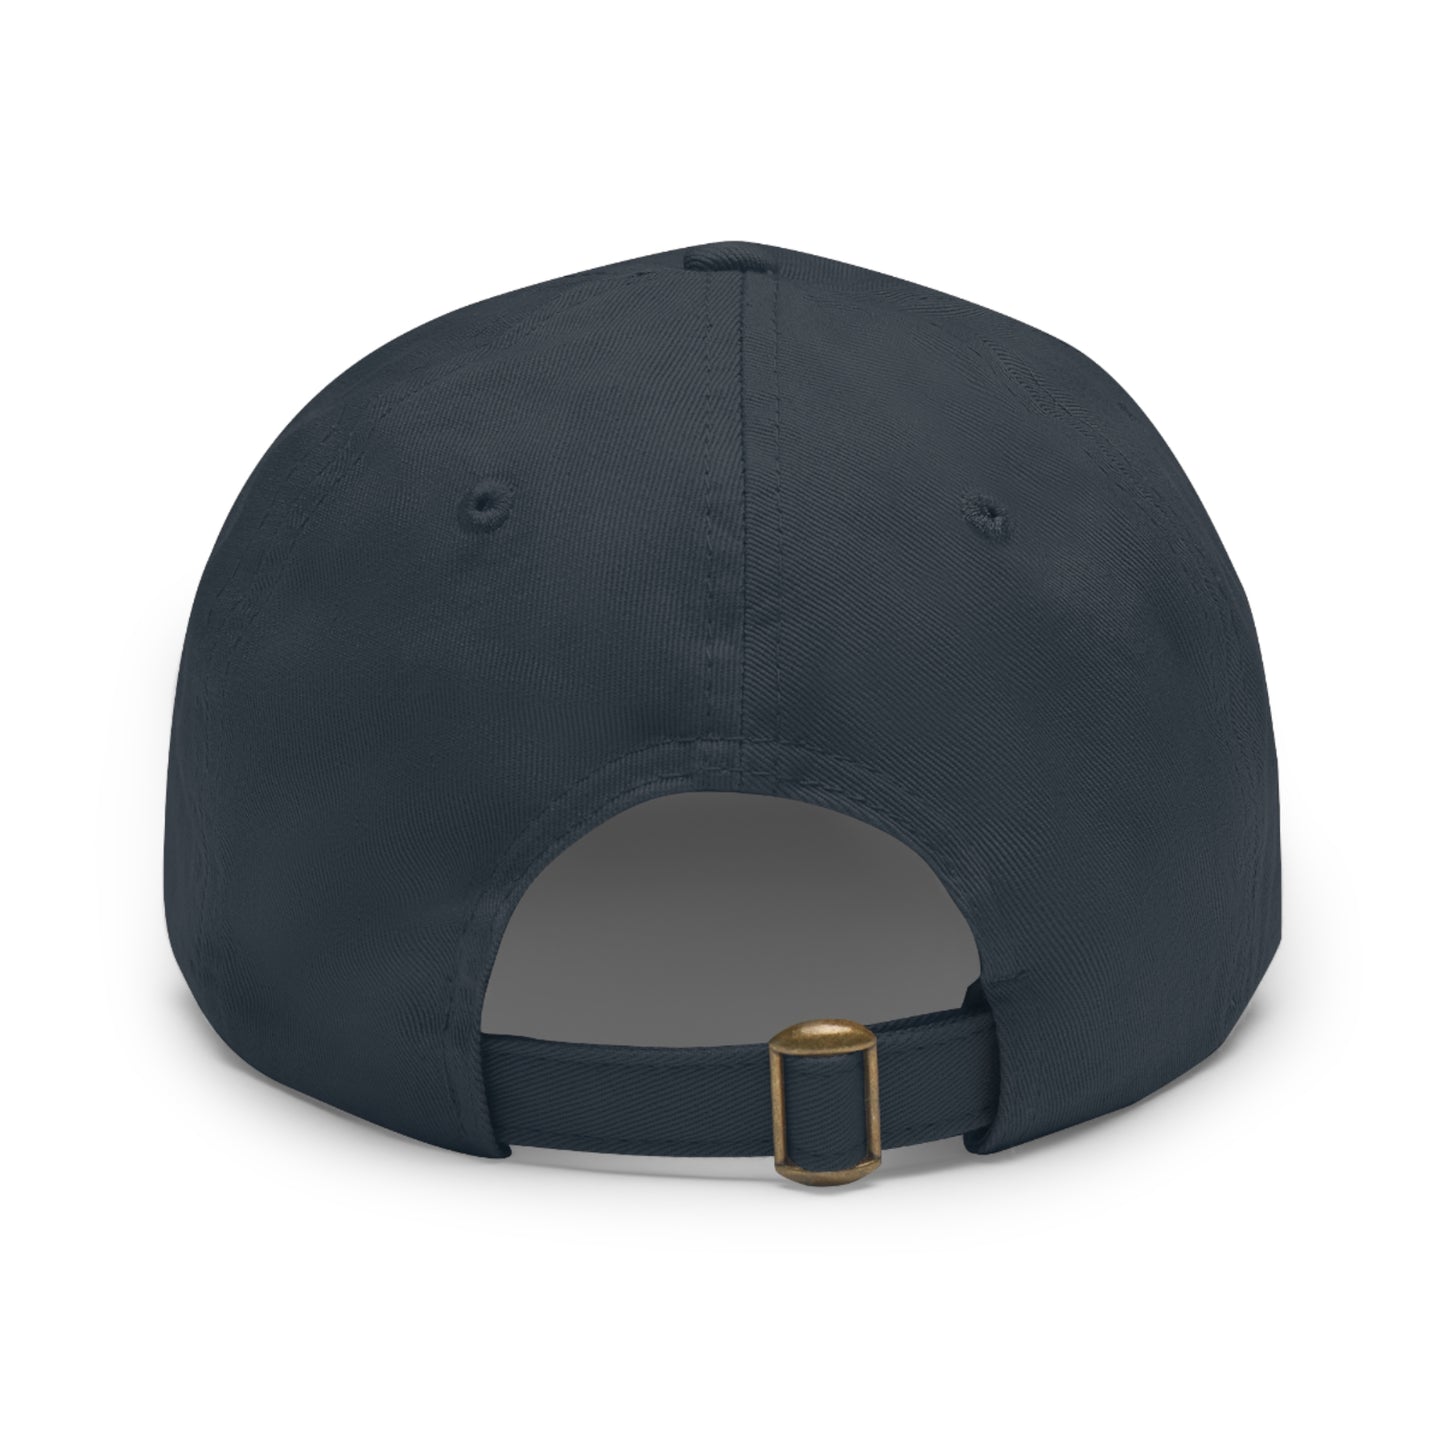 Inspire Purpose Hat with Leather Patch (Rectangle)